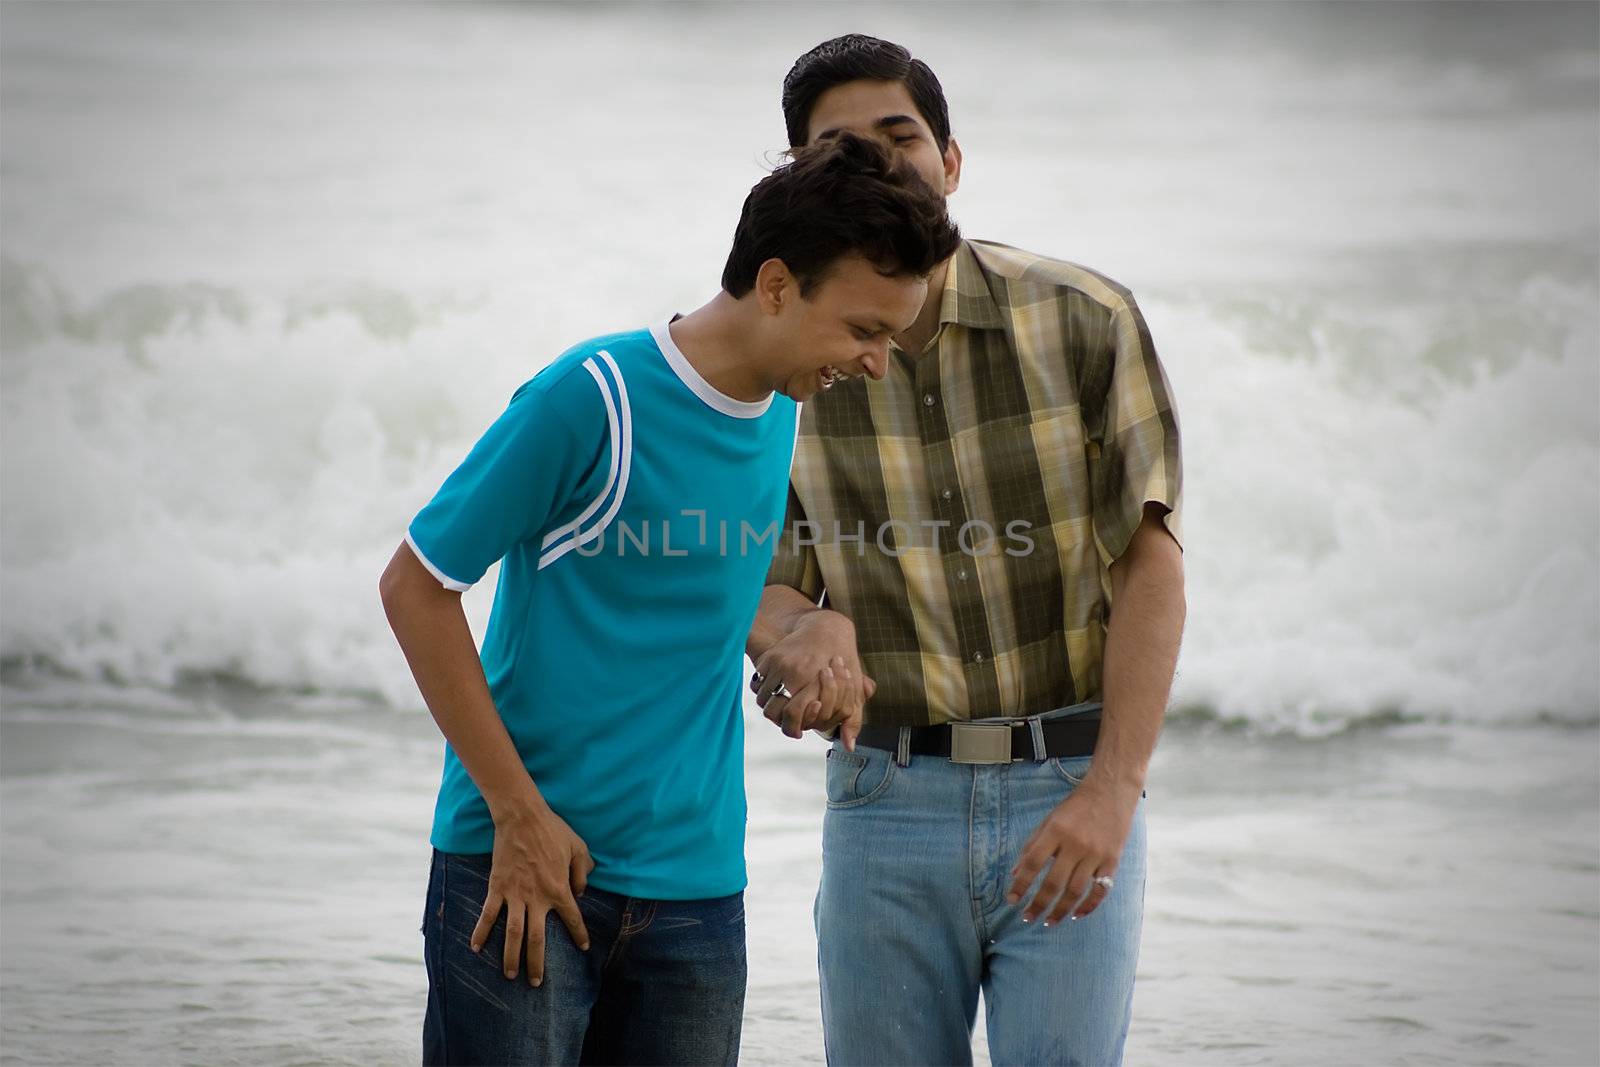 Two men standing on a beach at the shoreline, chatting and watching something